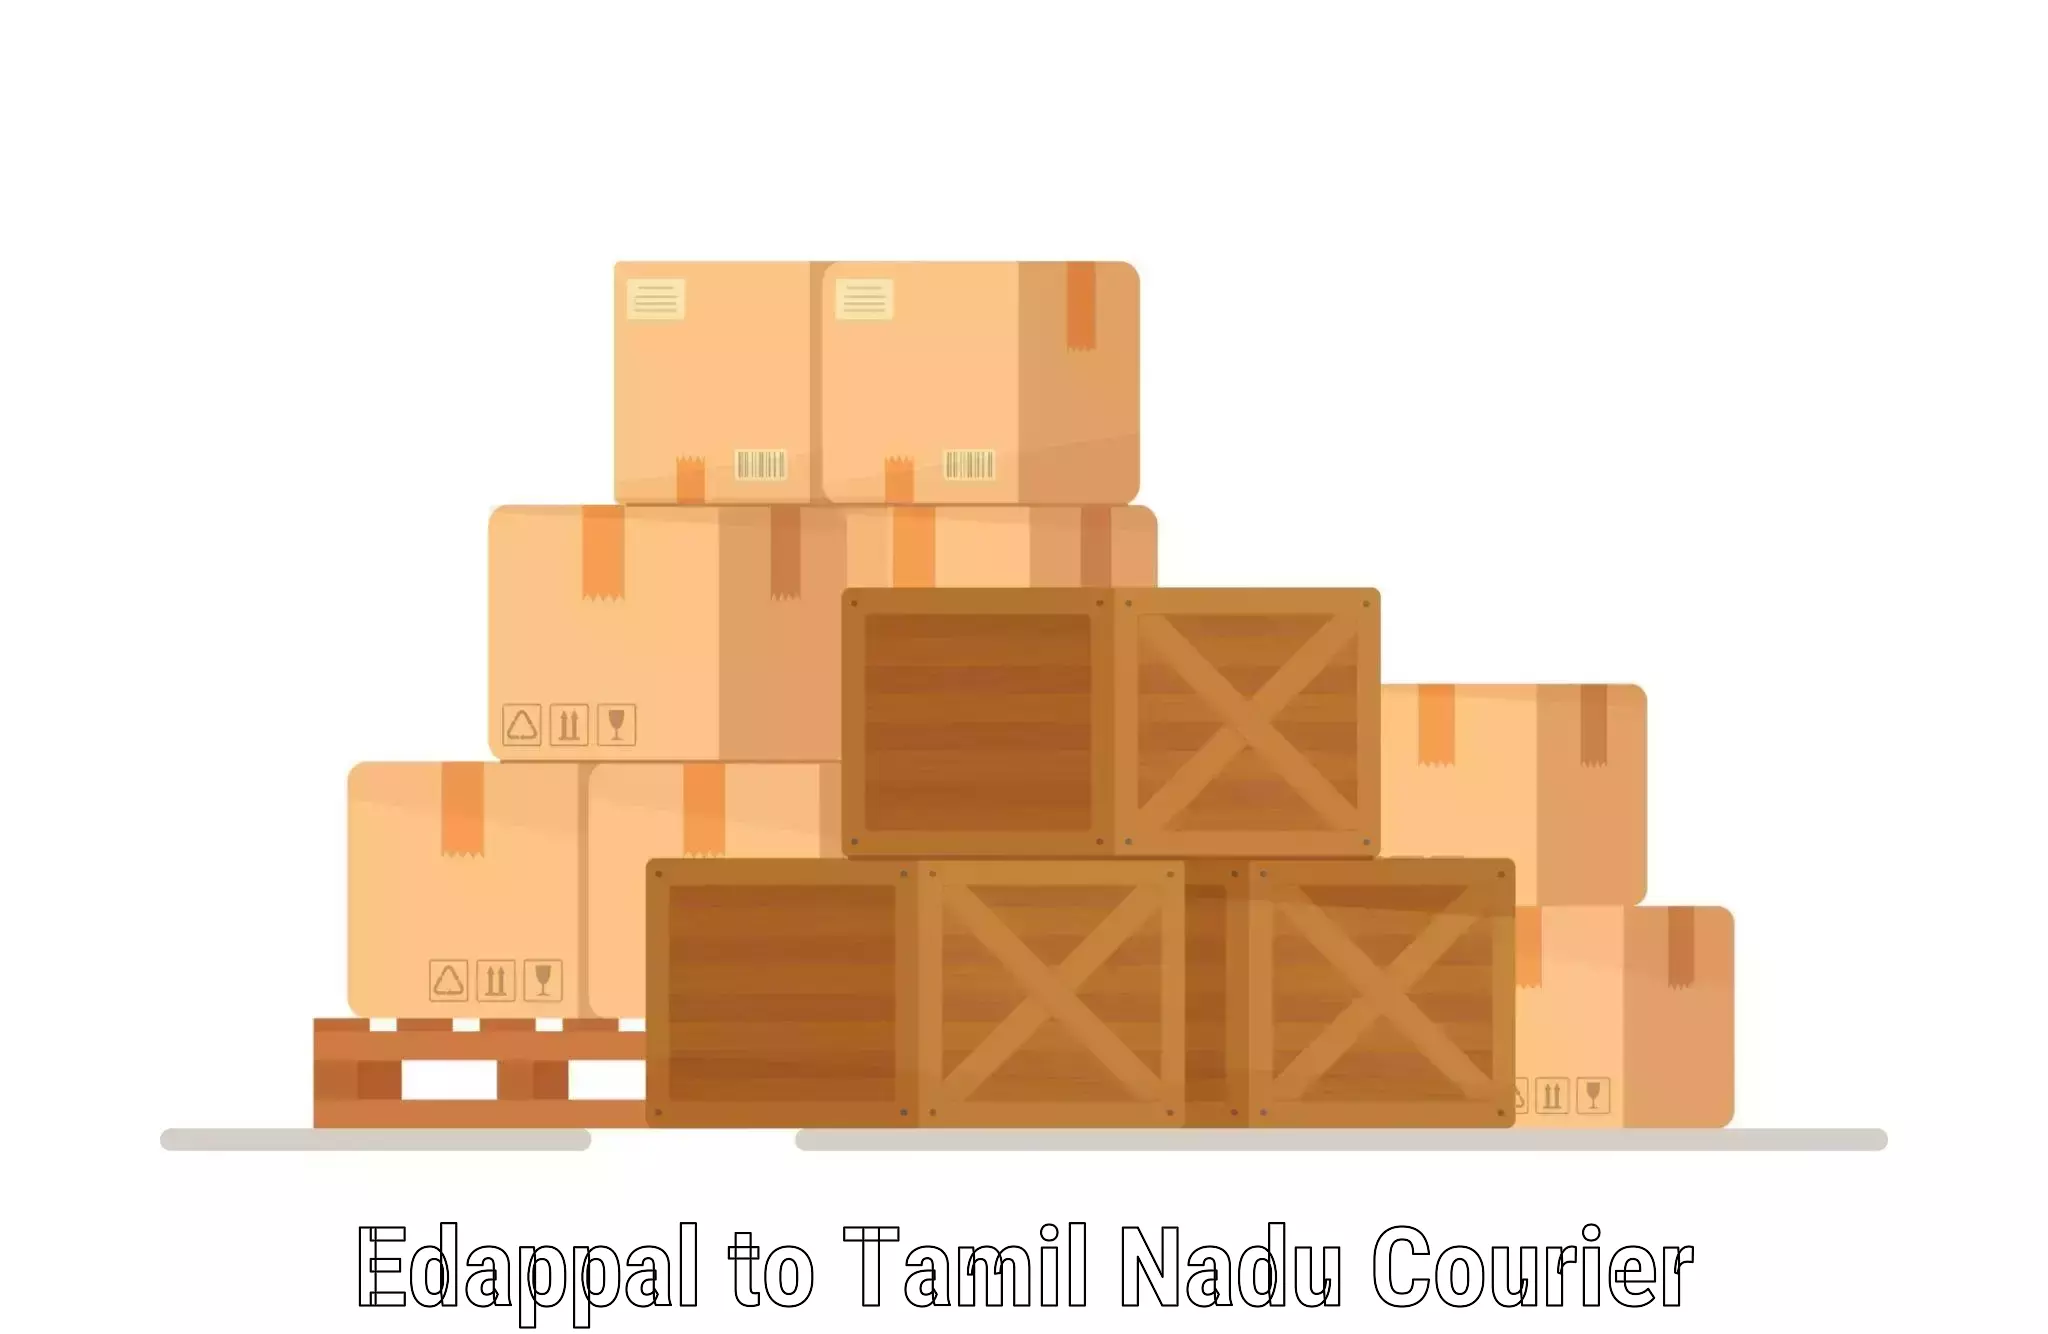 Optimized delivery routes Edappal to Tamil Nadu